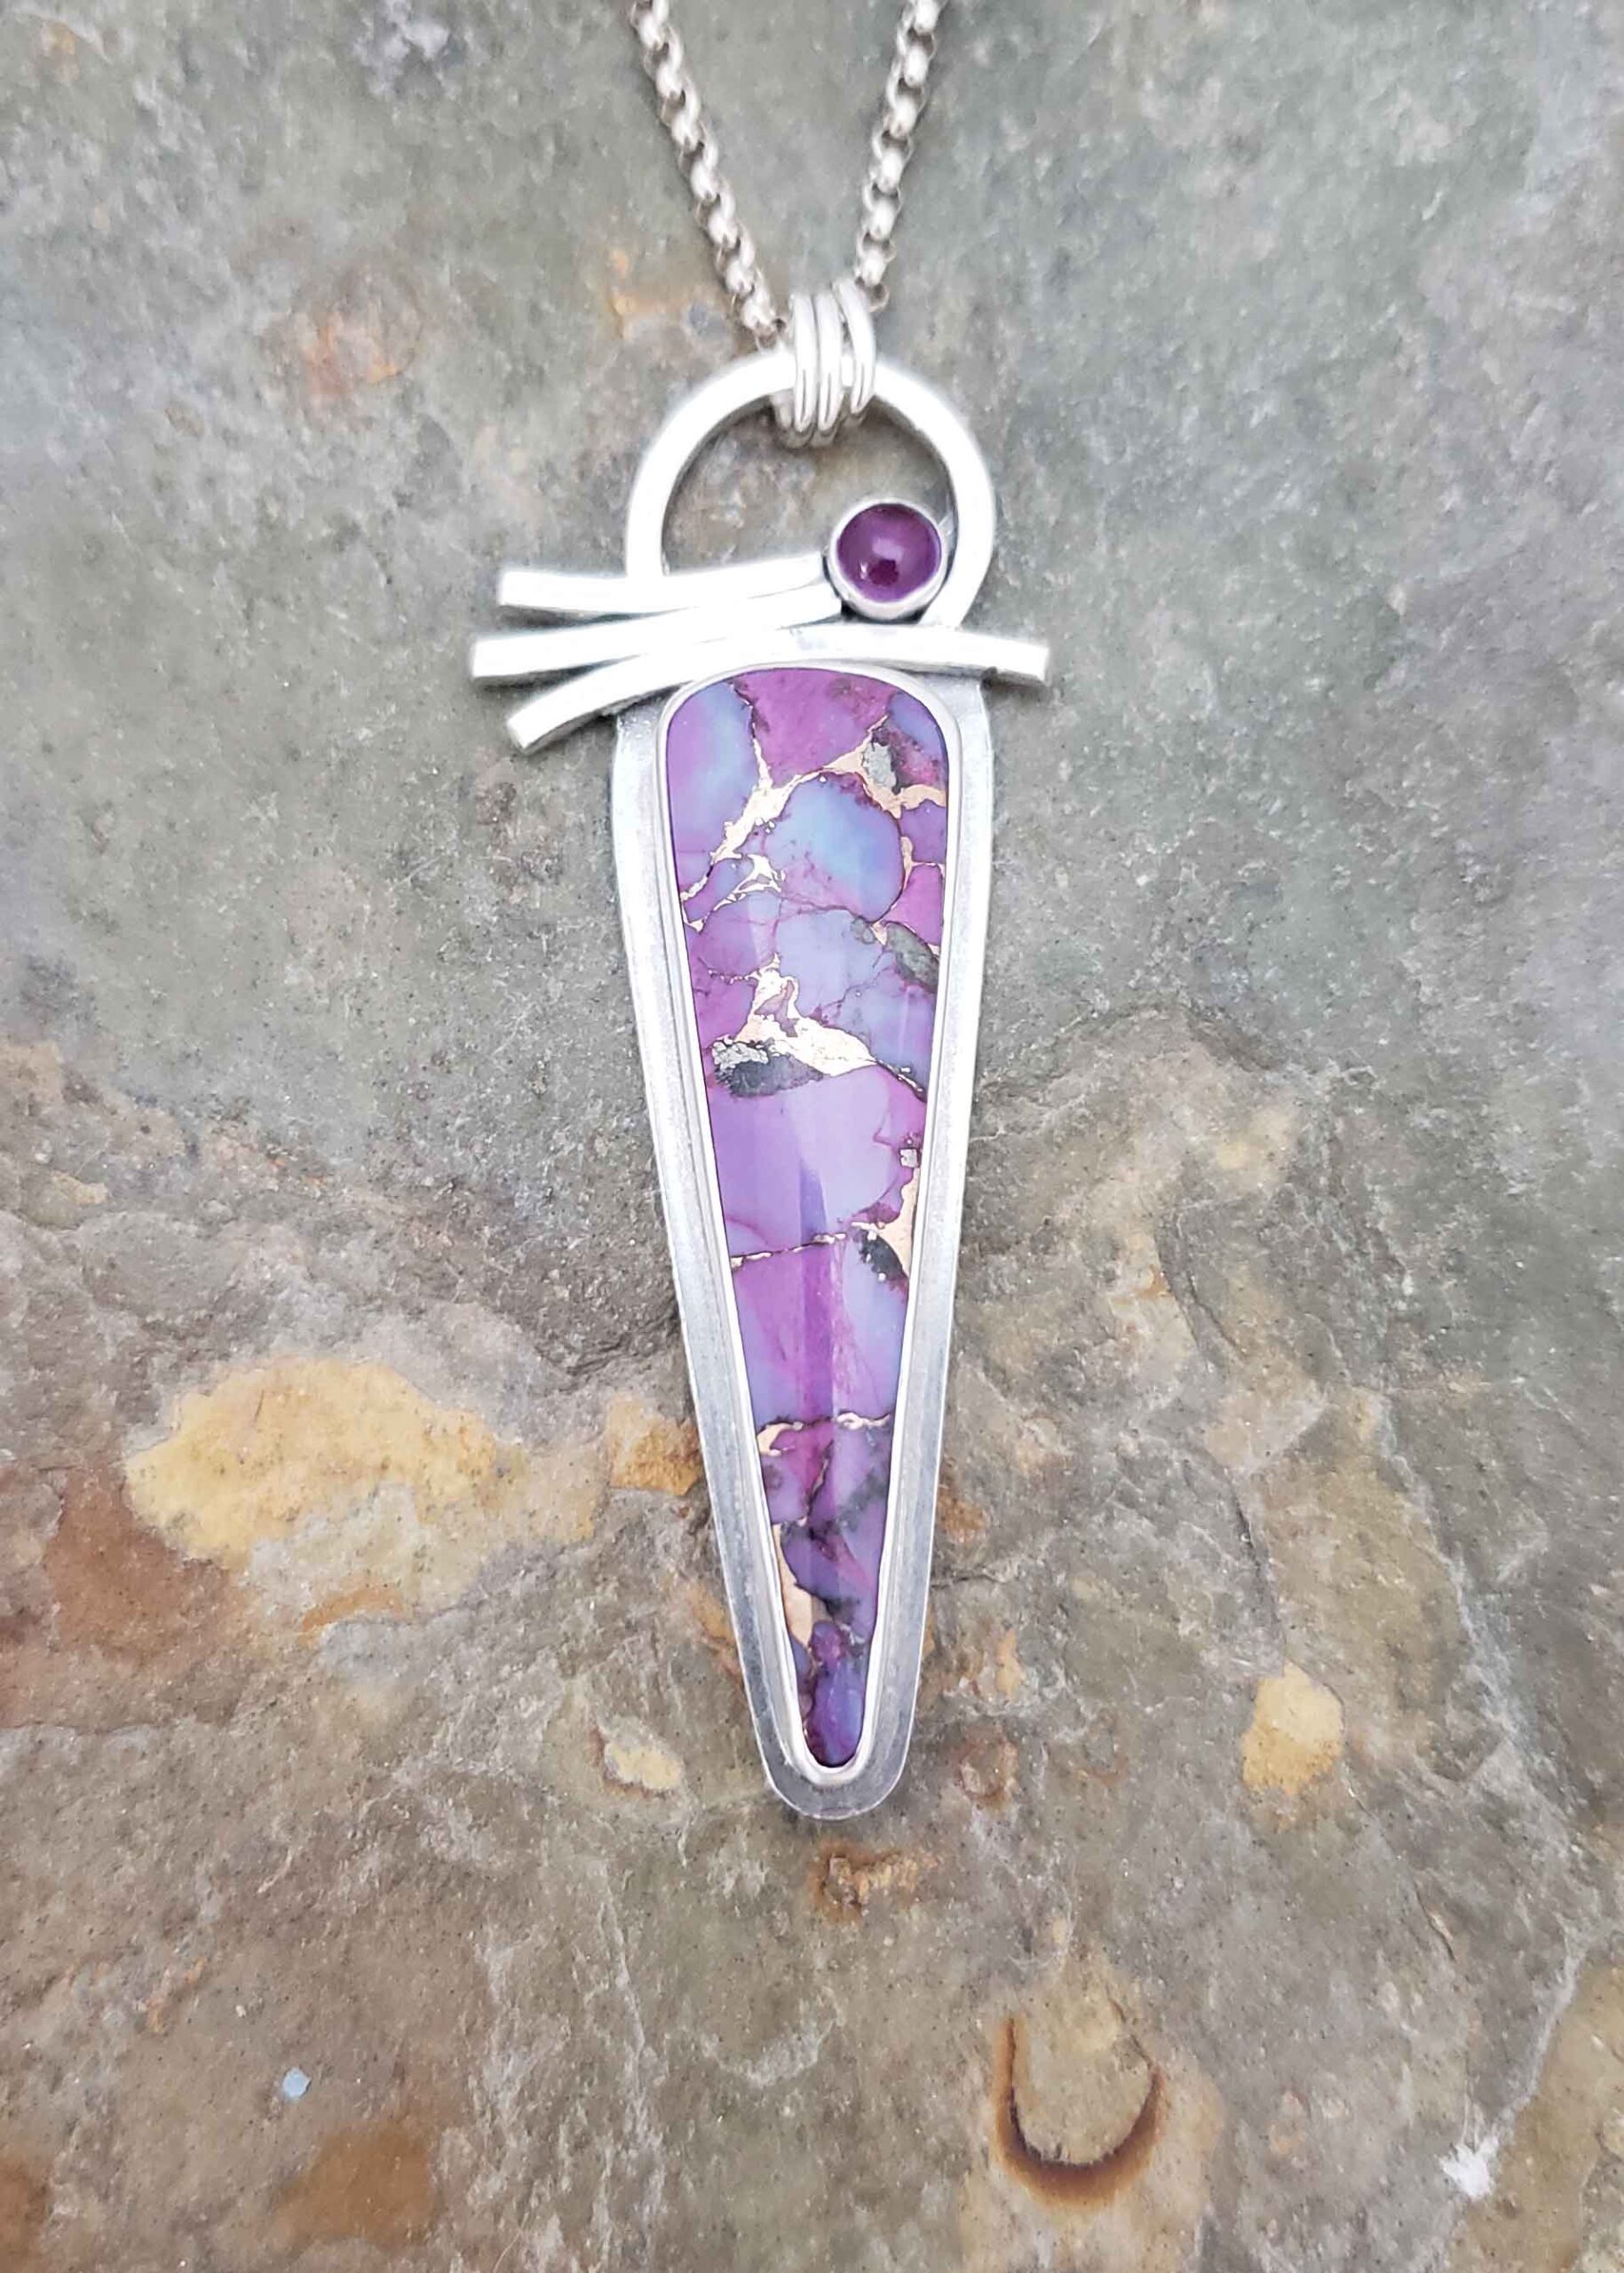 Apogee purple turquoise and amethyst silver pendant.